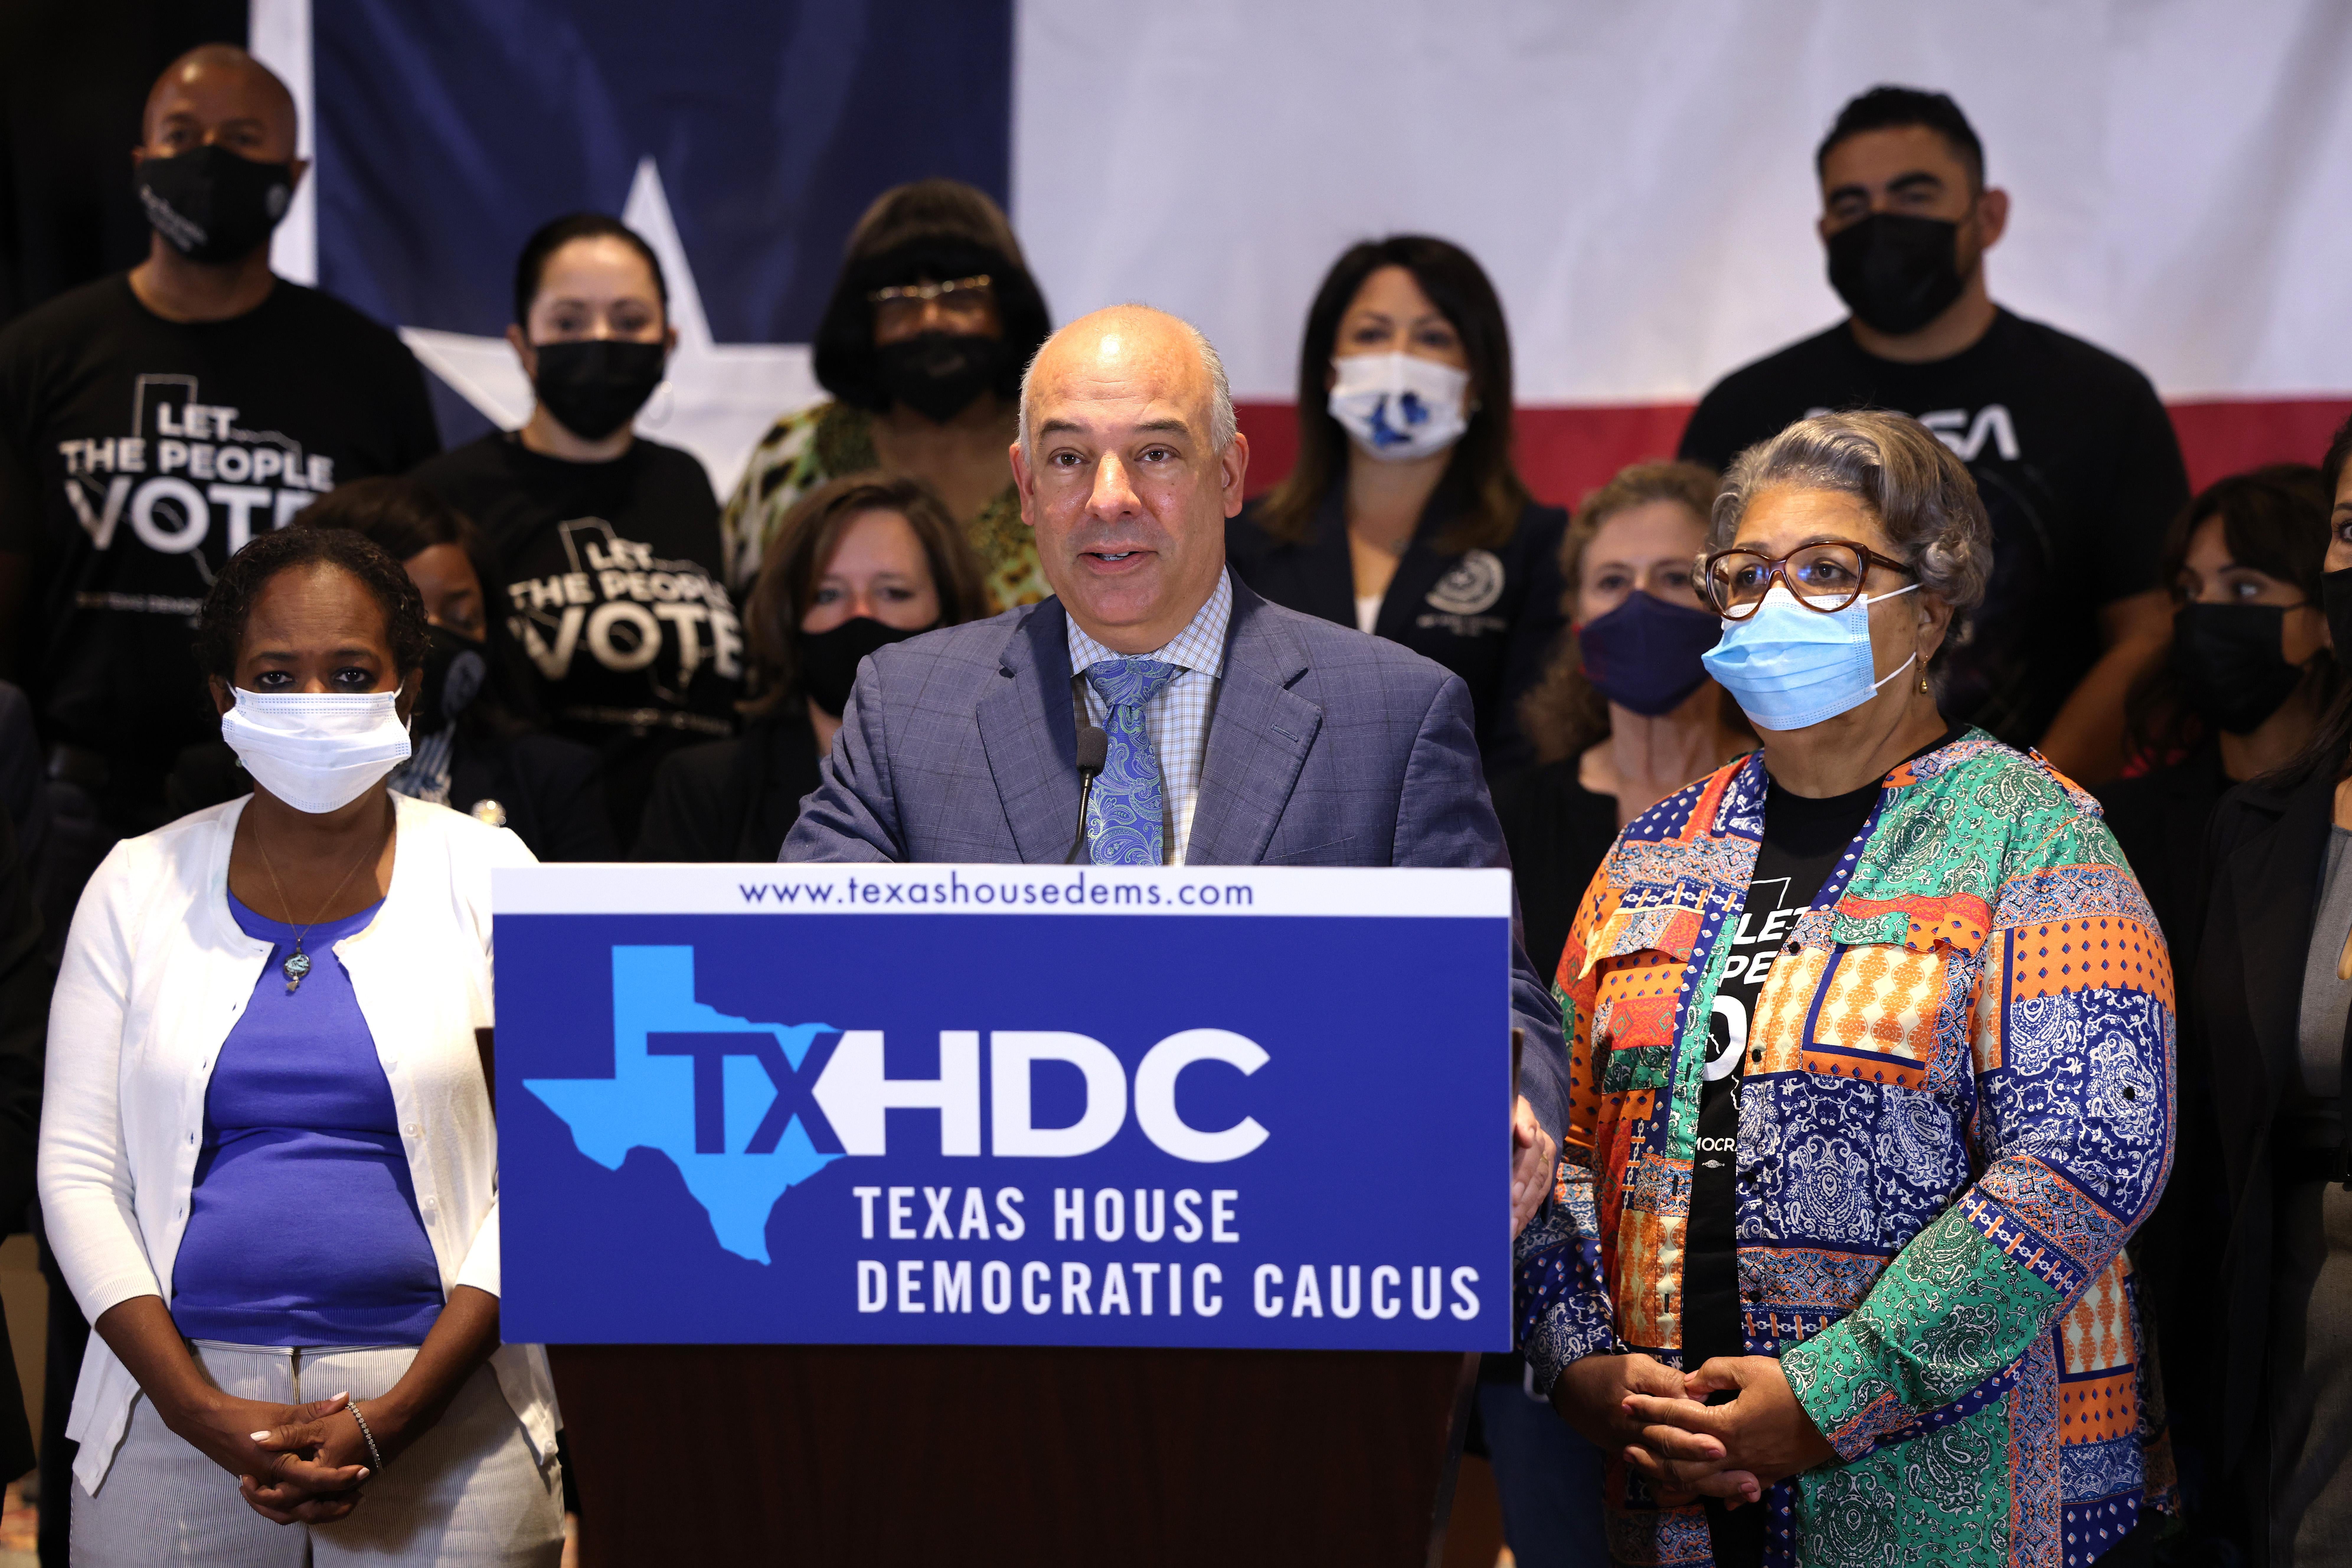 A man, backed by various people in face masks, speaks at a lectern with a sign reading, "TXHDC: Texas House Democratic Caucus."